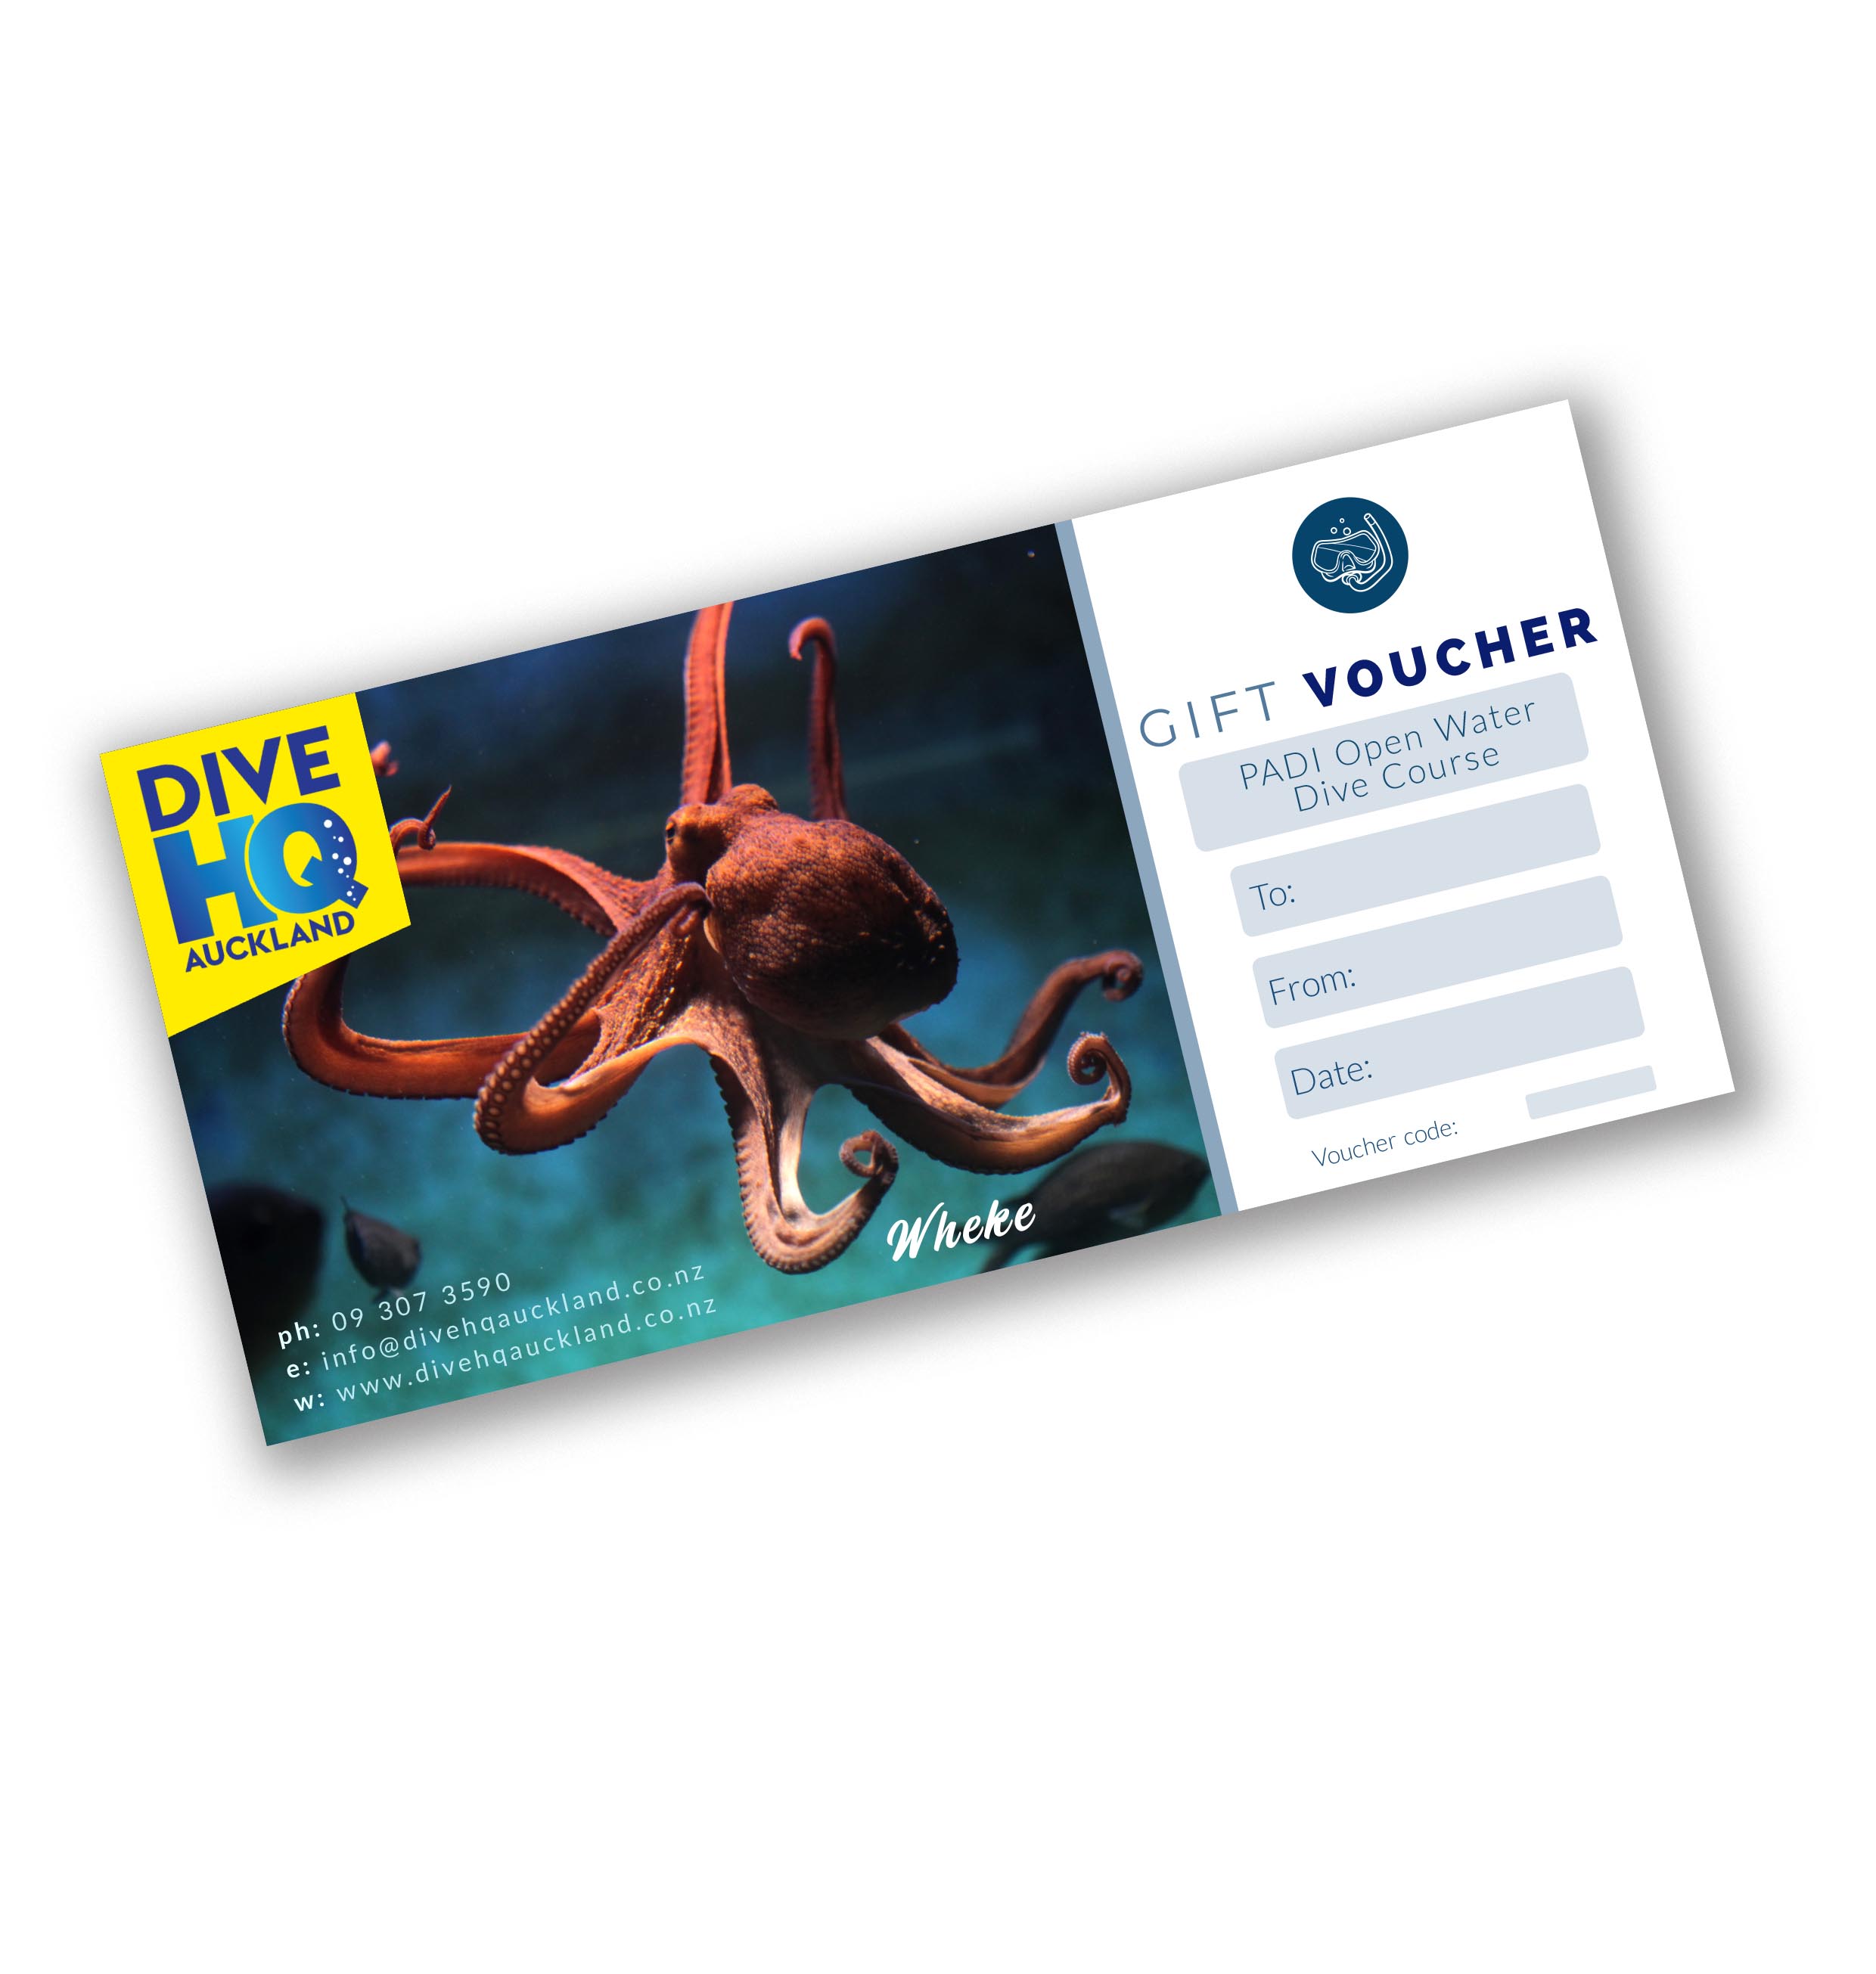 PADI Open Water Course Gift Voucher